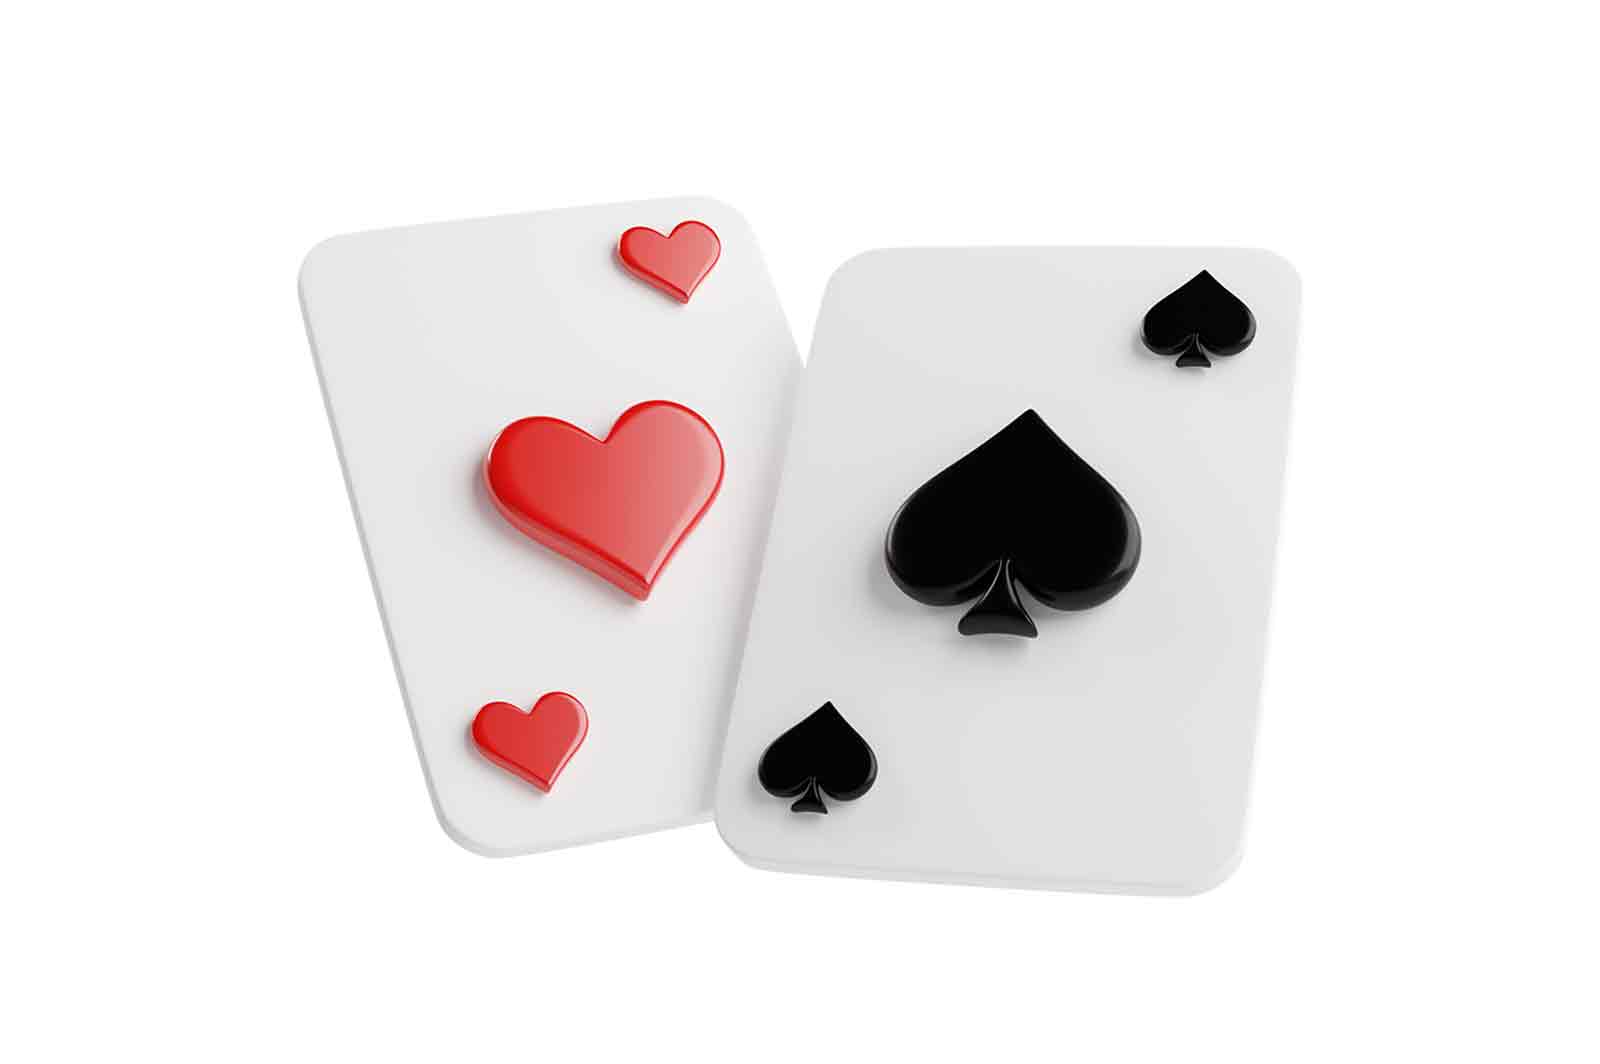 Three of Hearts and Spades, 3D Rendered Illustration of two white playing cards with rounded corners, one with three red hearts and one with three black spades. The image symbolizes card games, gambling, and luck.